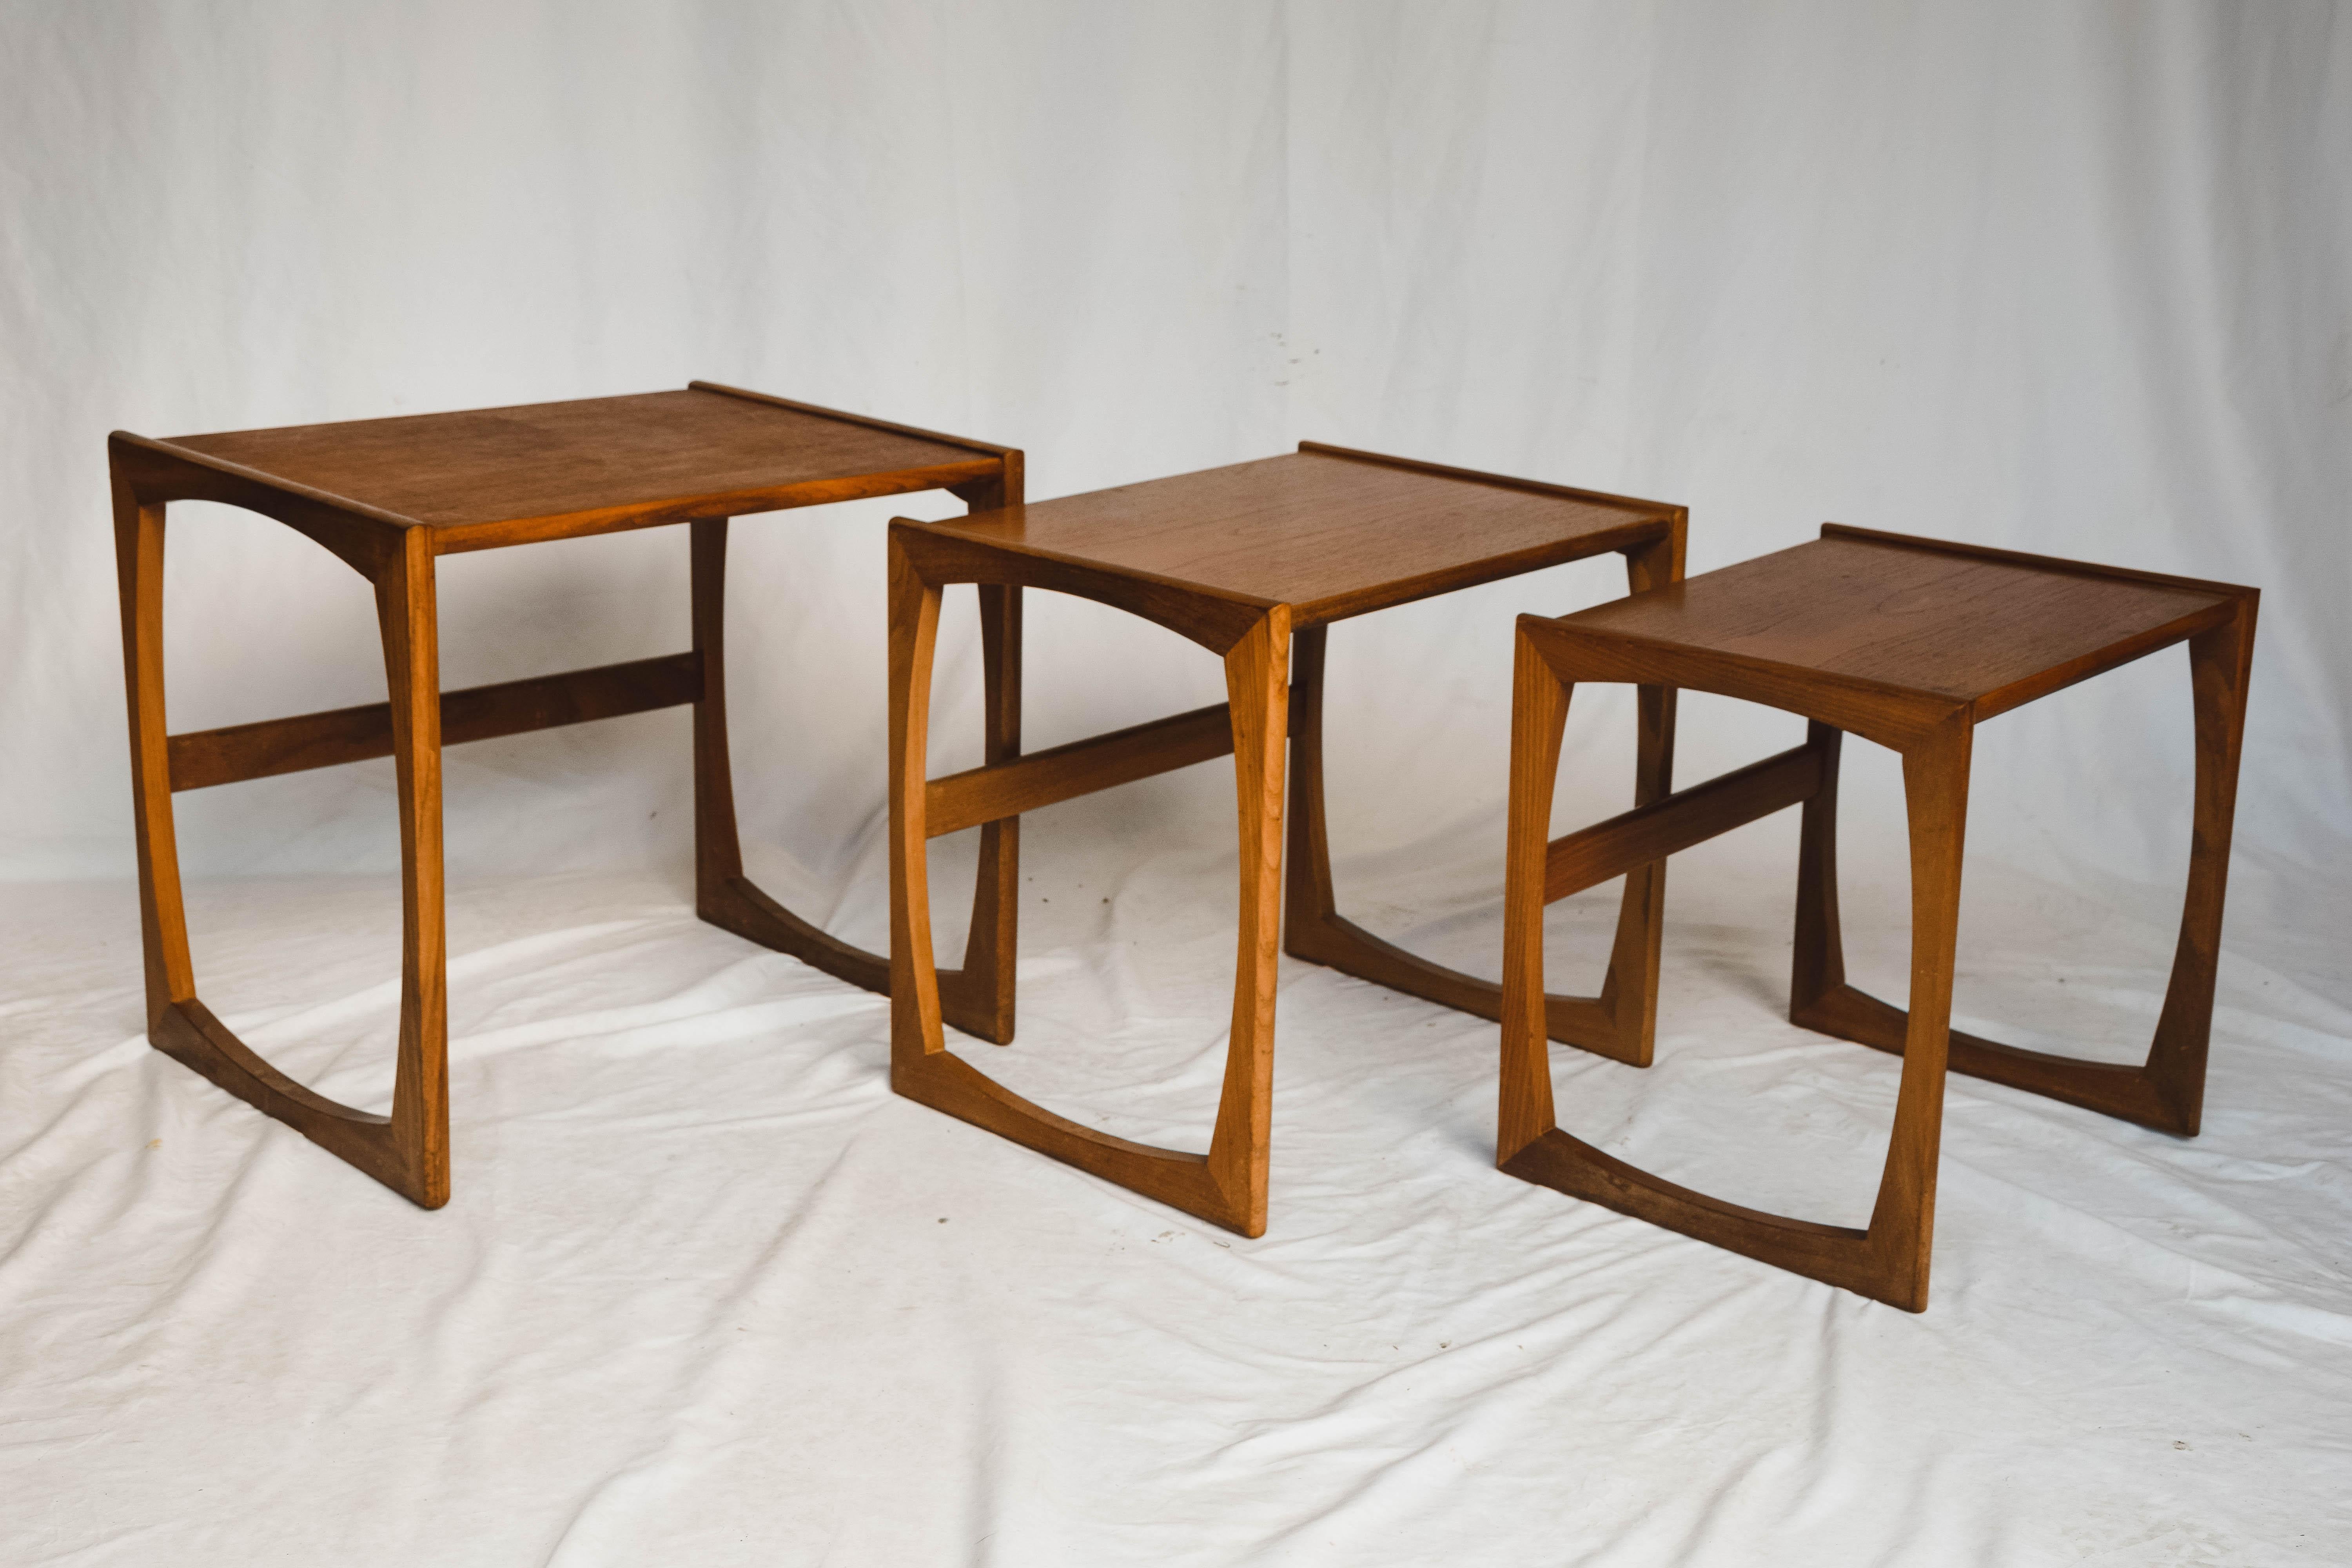 20th Century Mid-Century Modern Quadrille Nesting Table by G-Plan